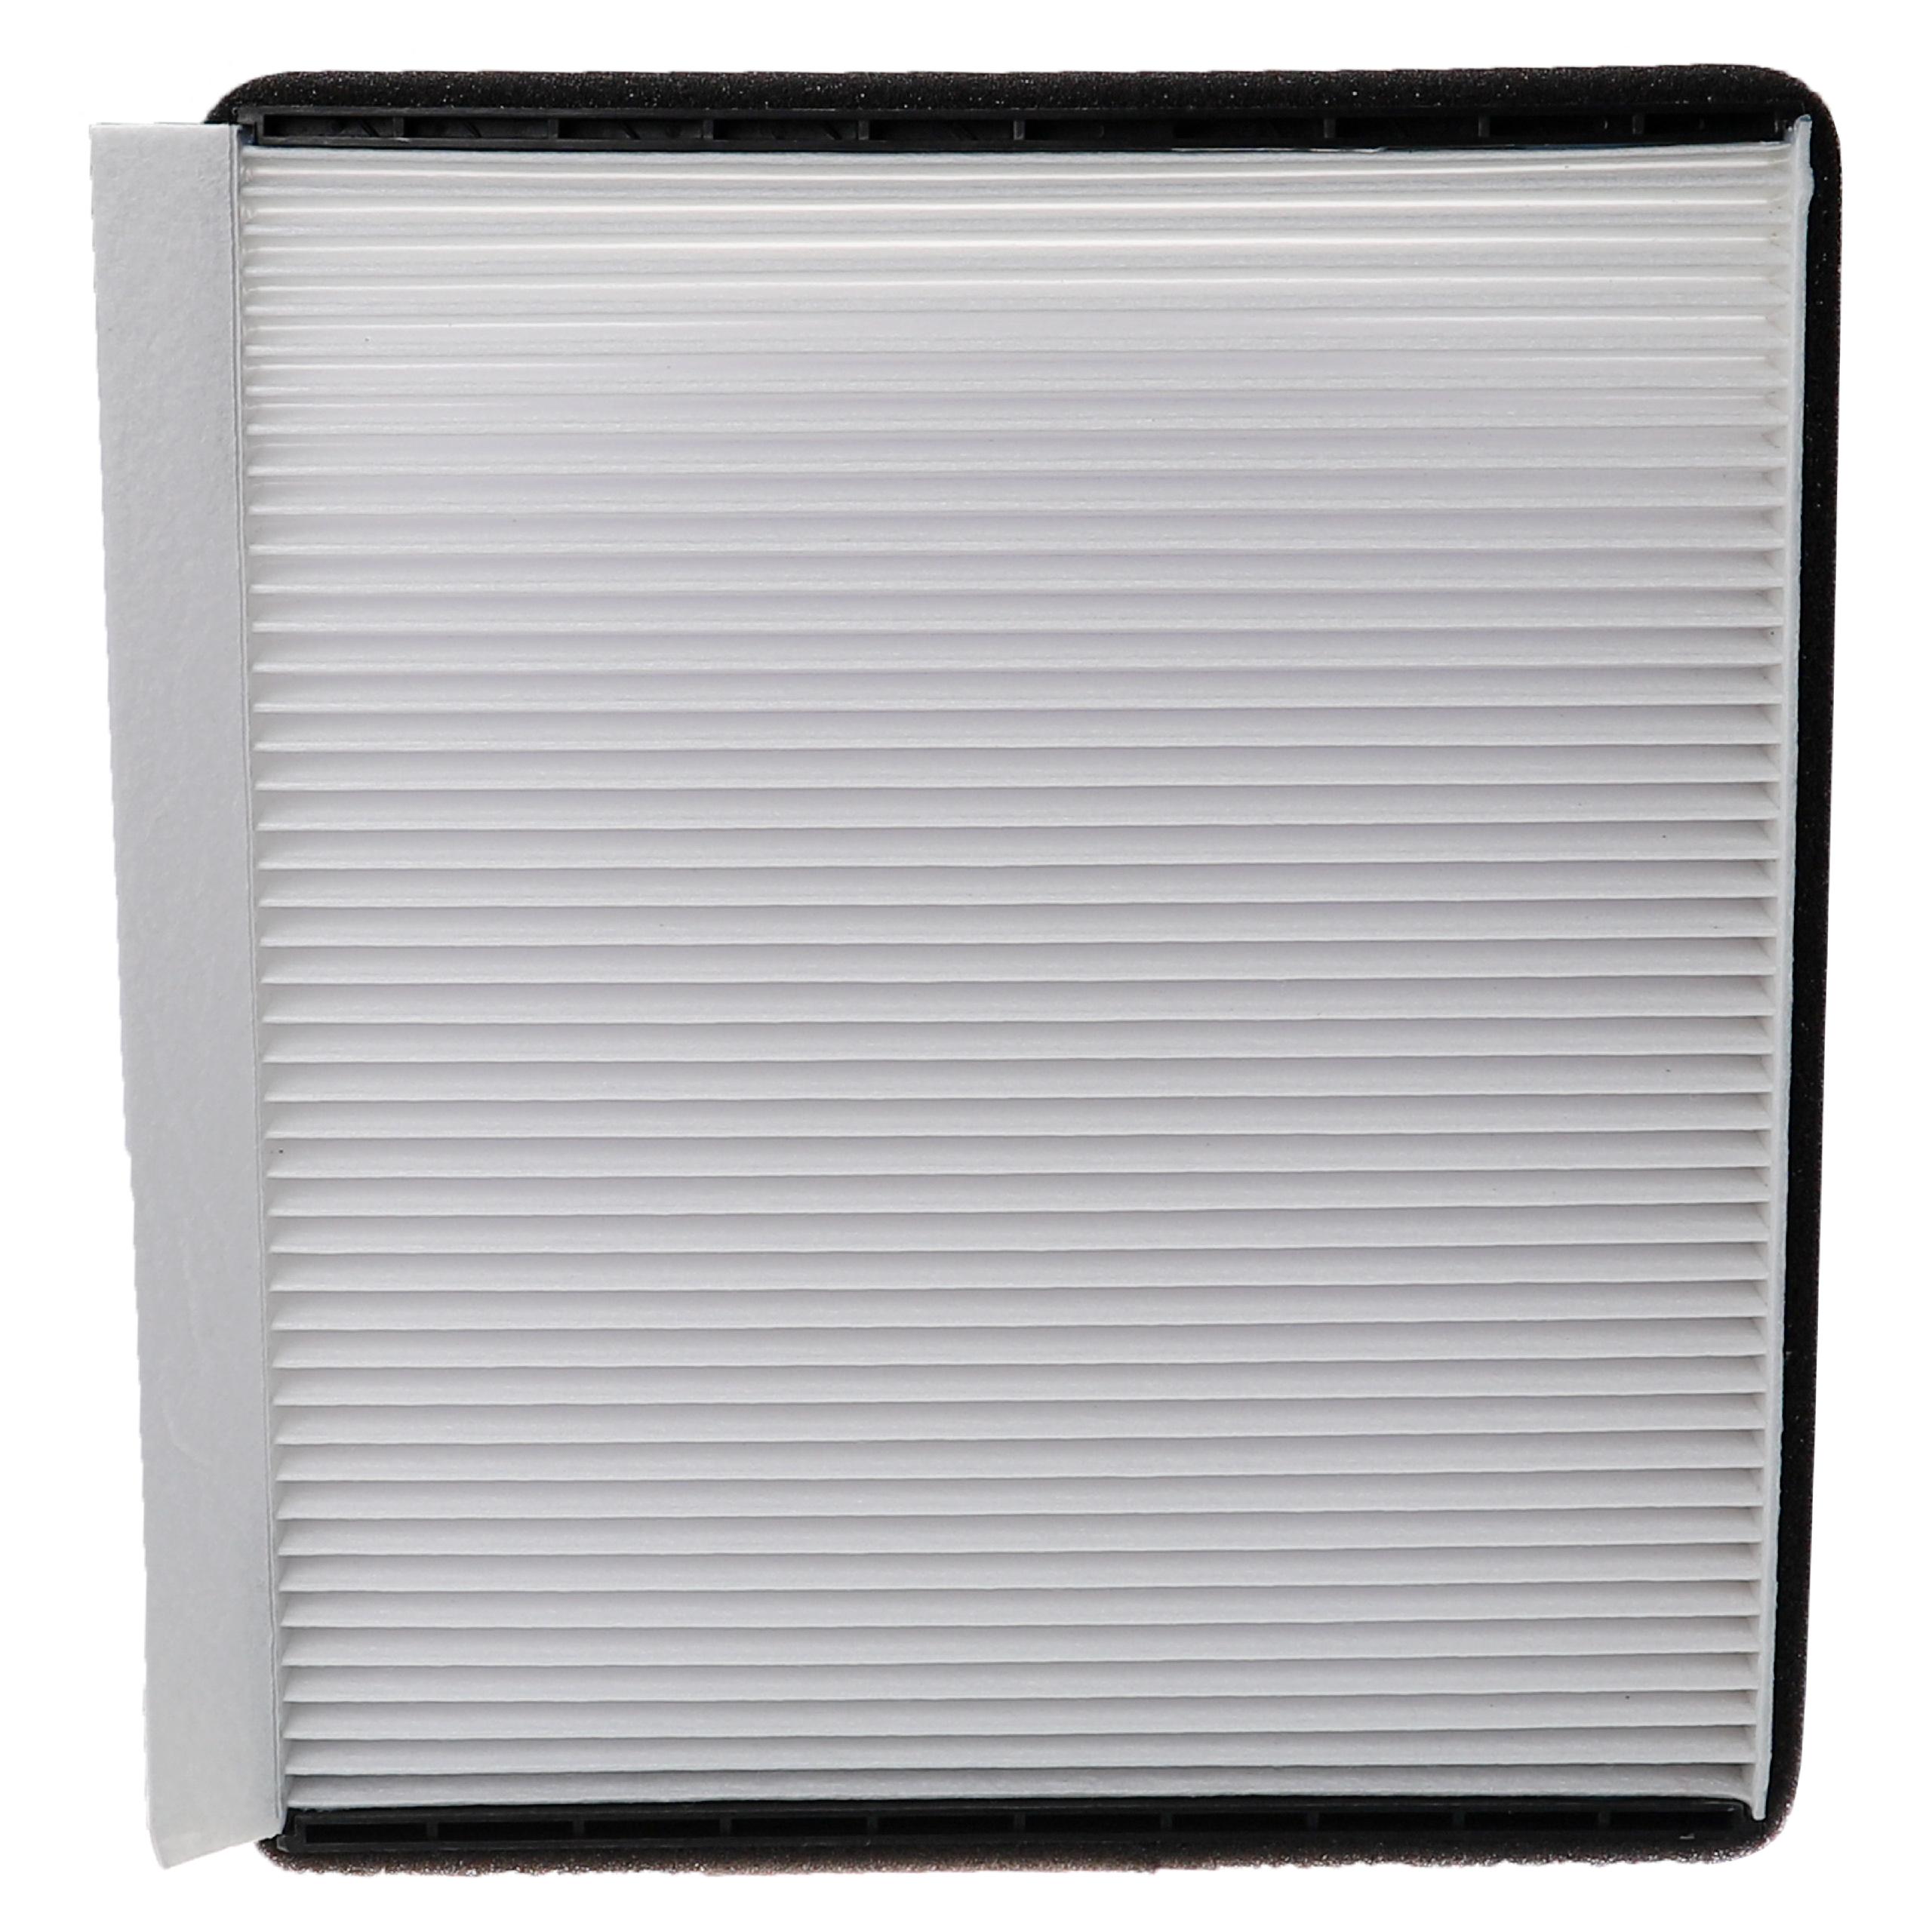 Cabin Air Filter replaces AP Xenergy X10736 etc.